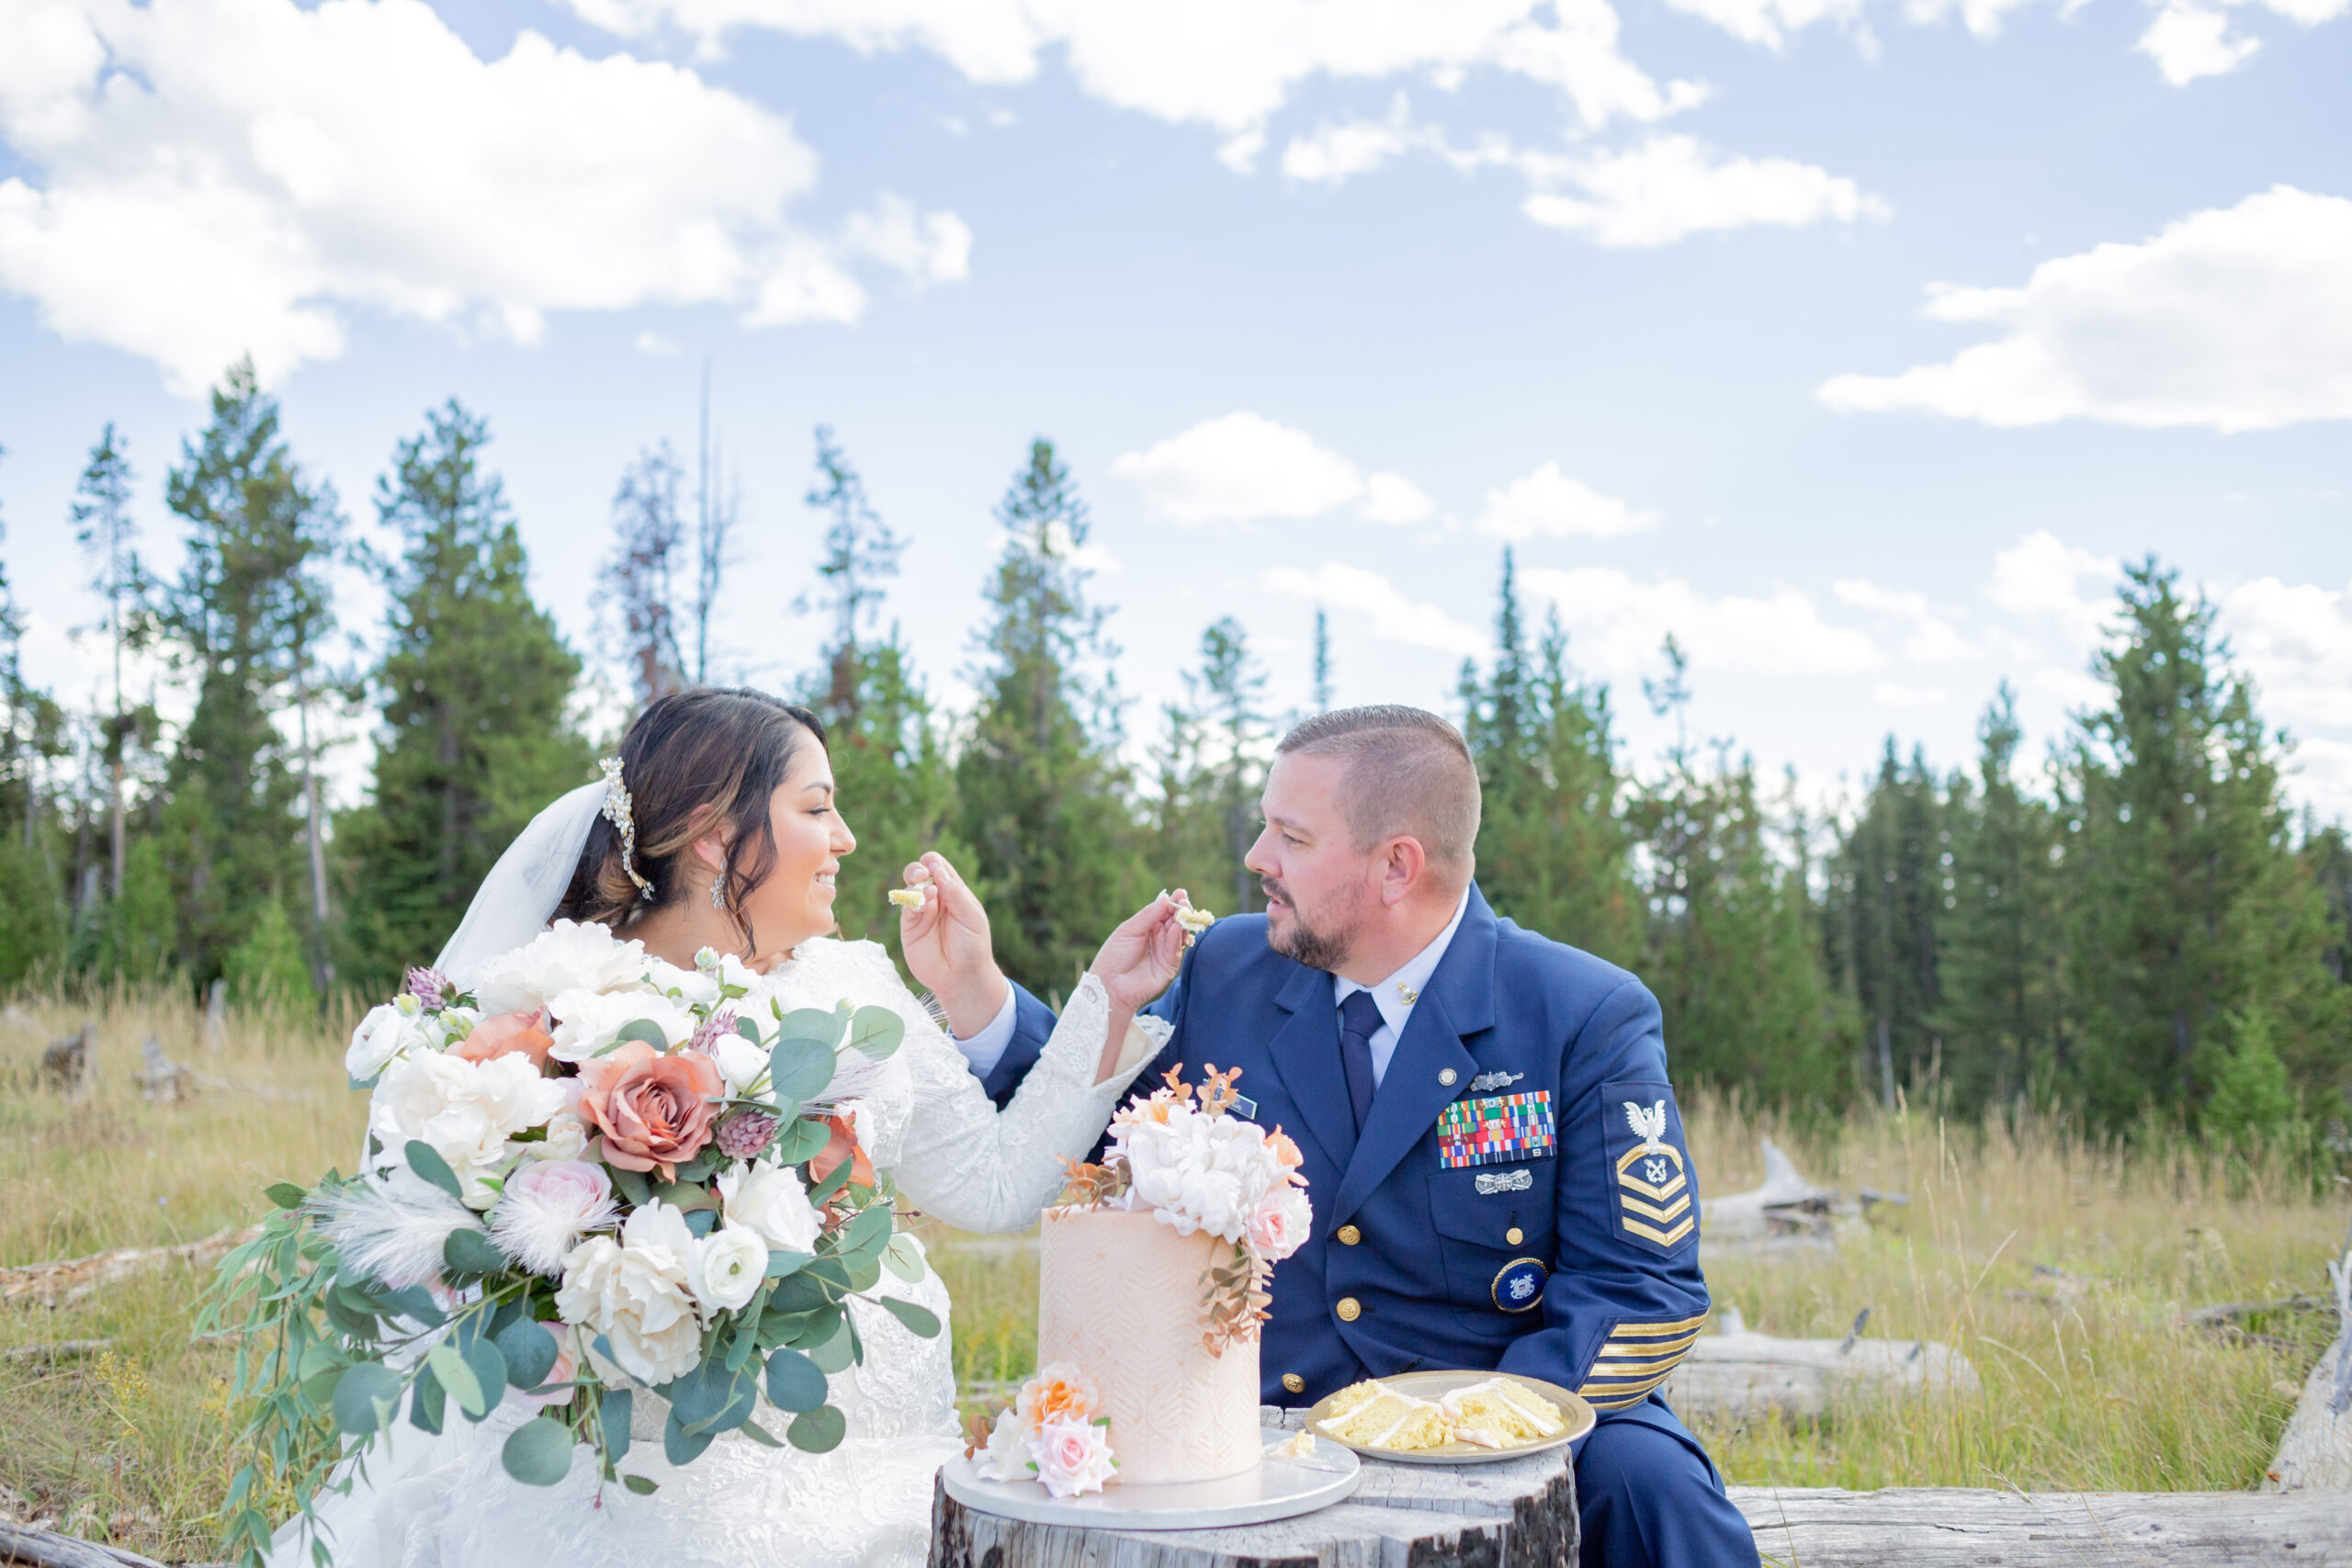 PNW Elopement Photographer captures bride and groom feeding one another cake